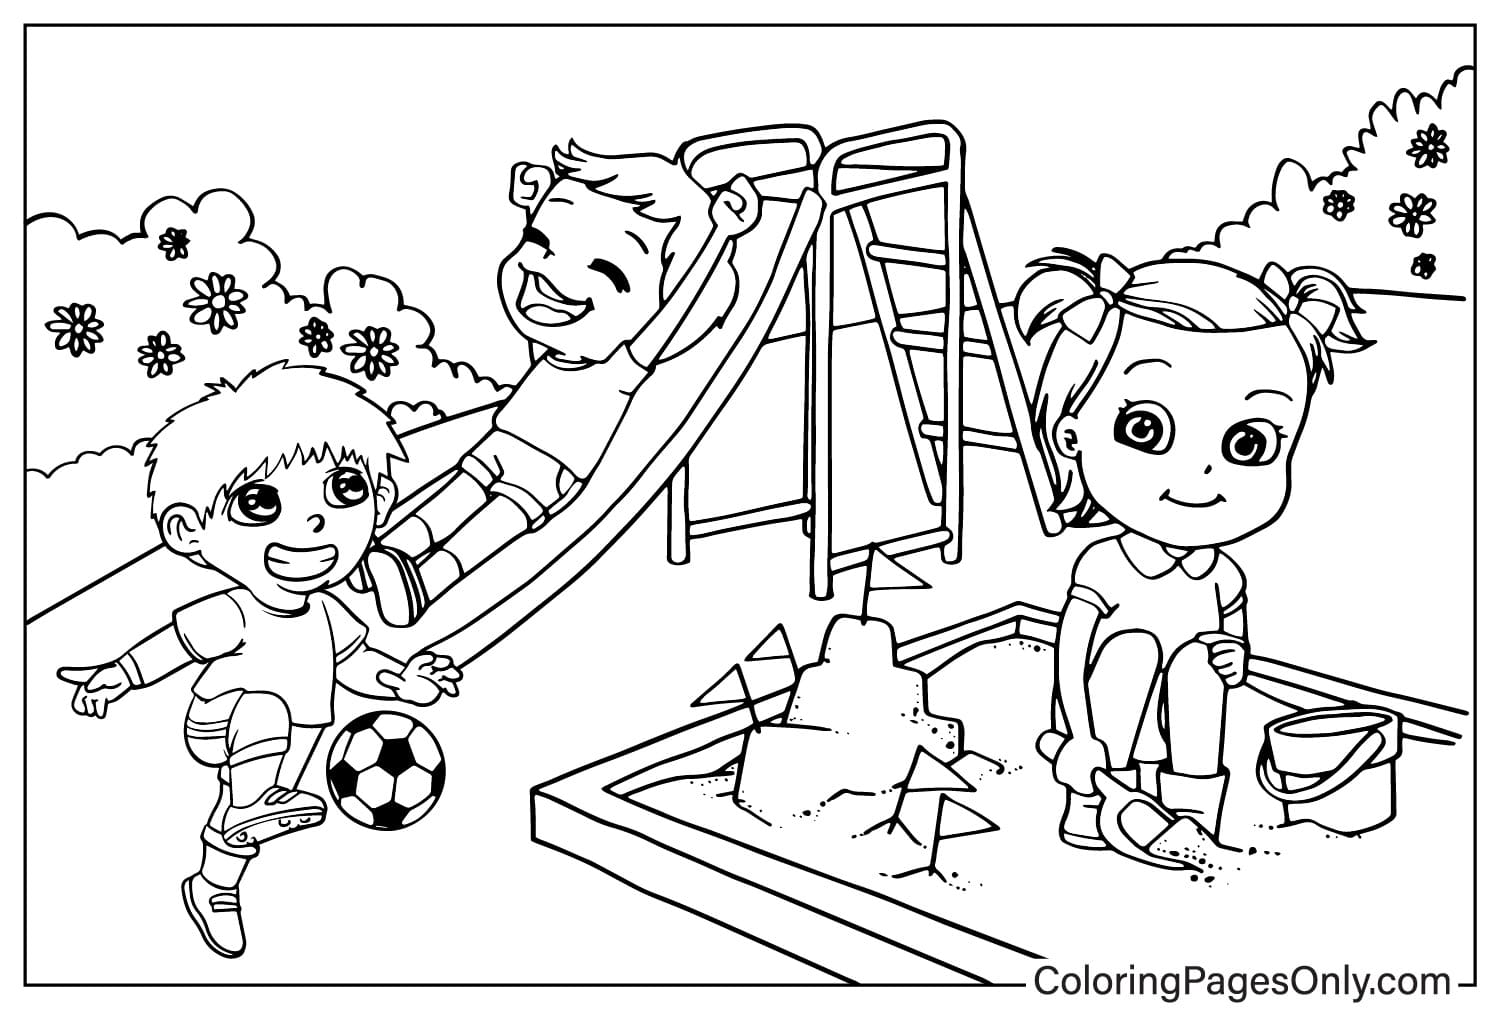 Playground Coloring Page Free from Playground